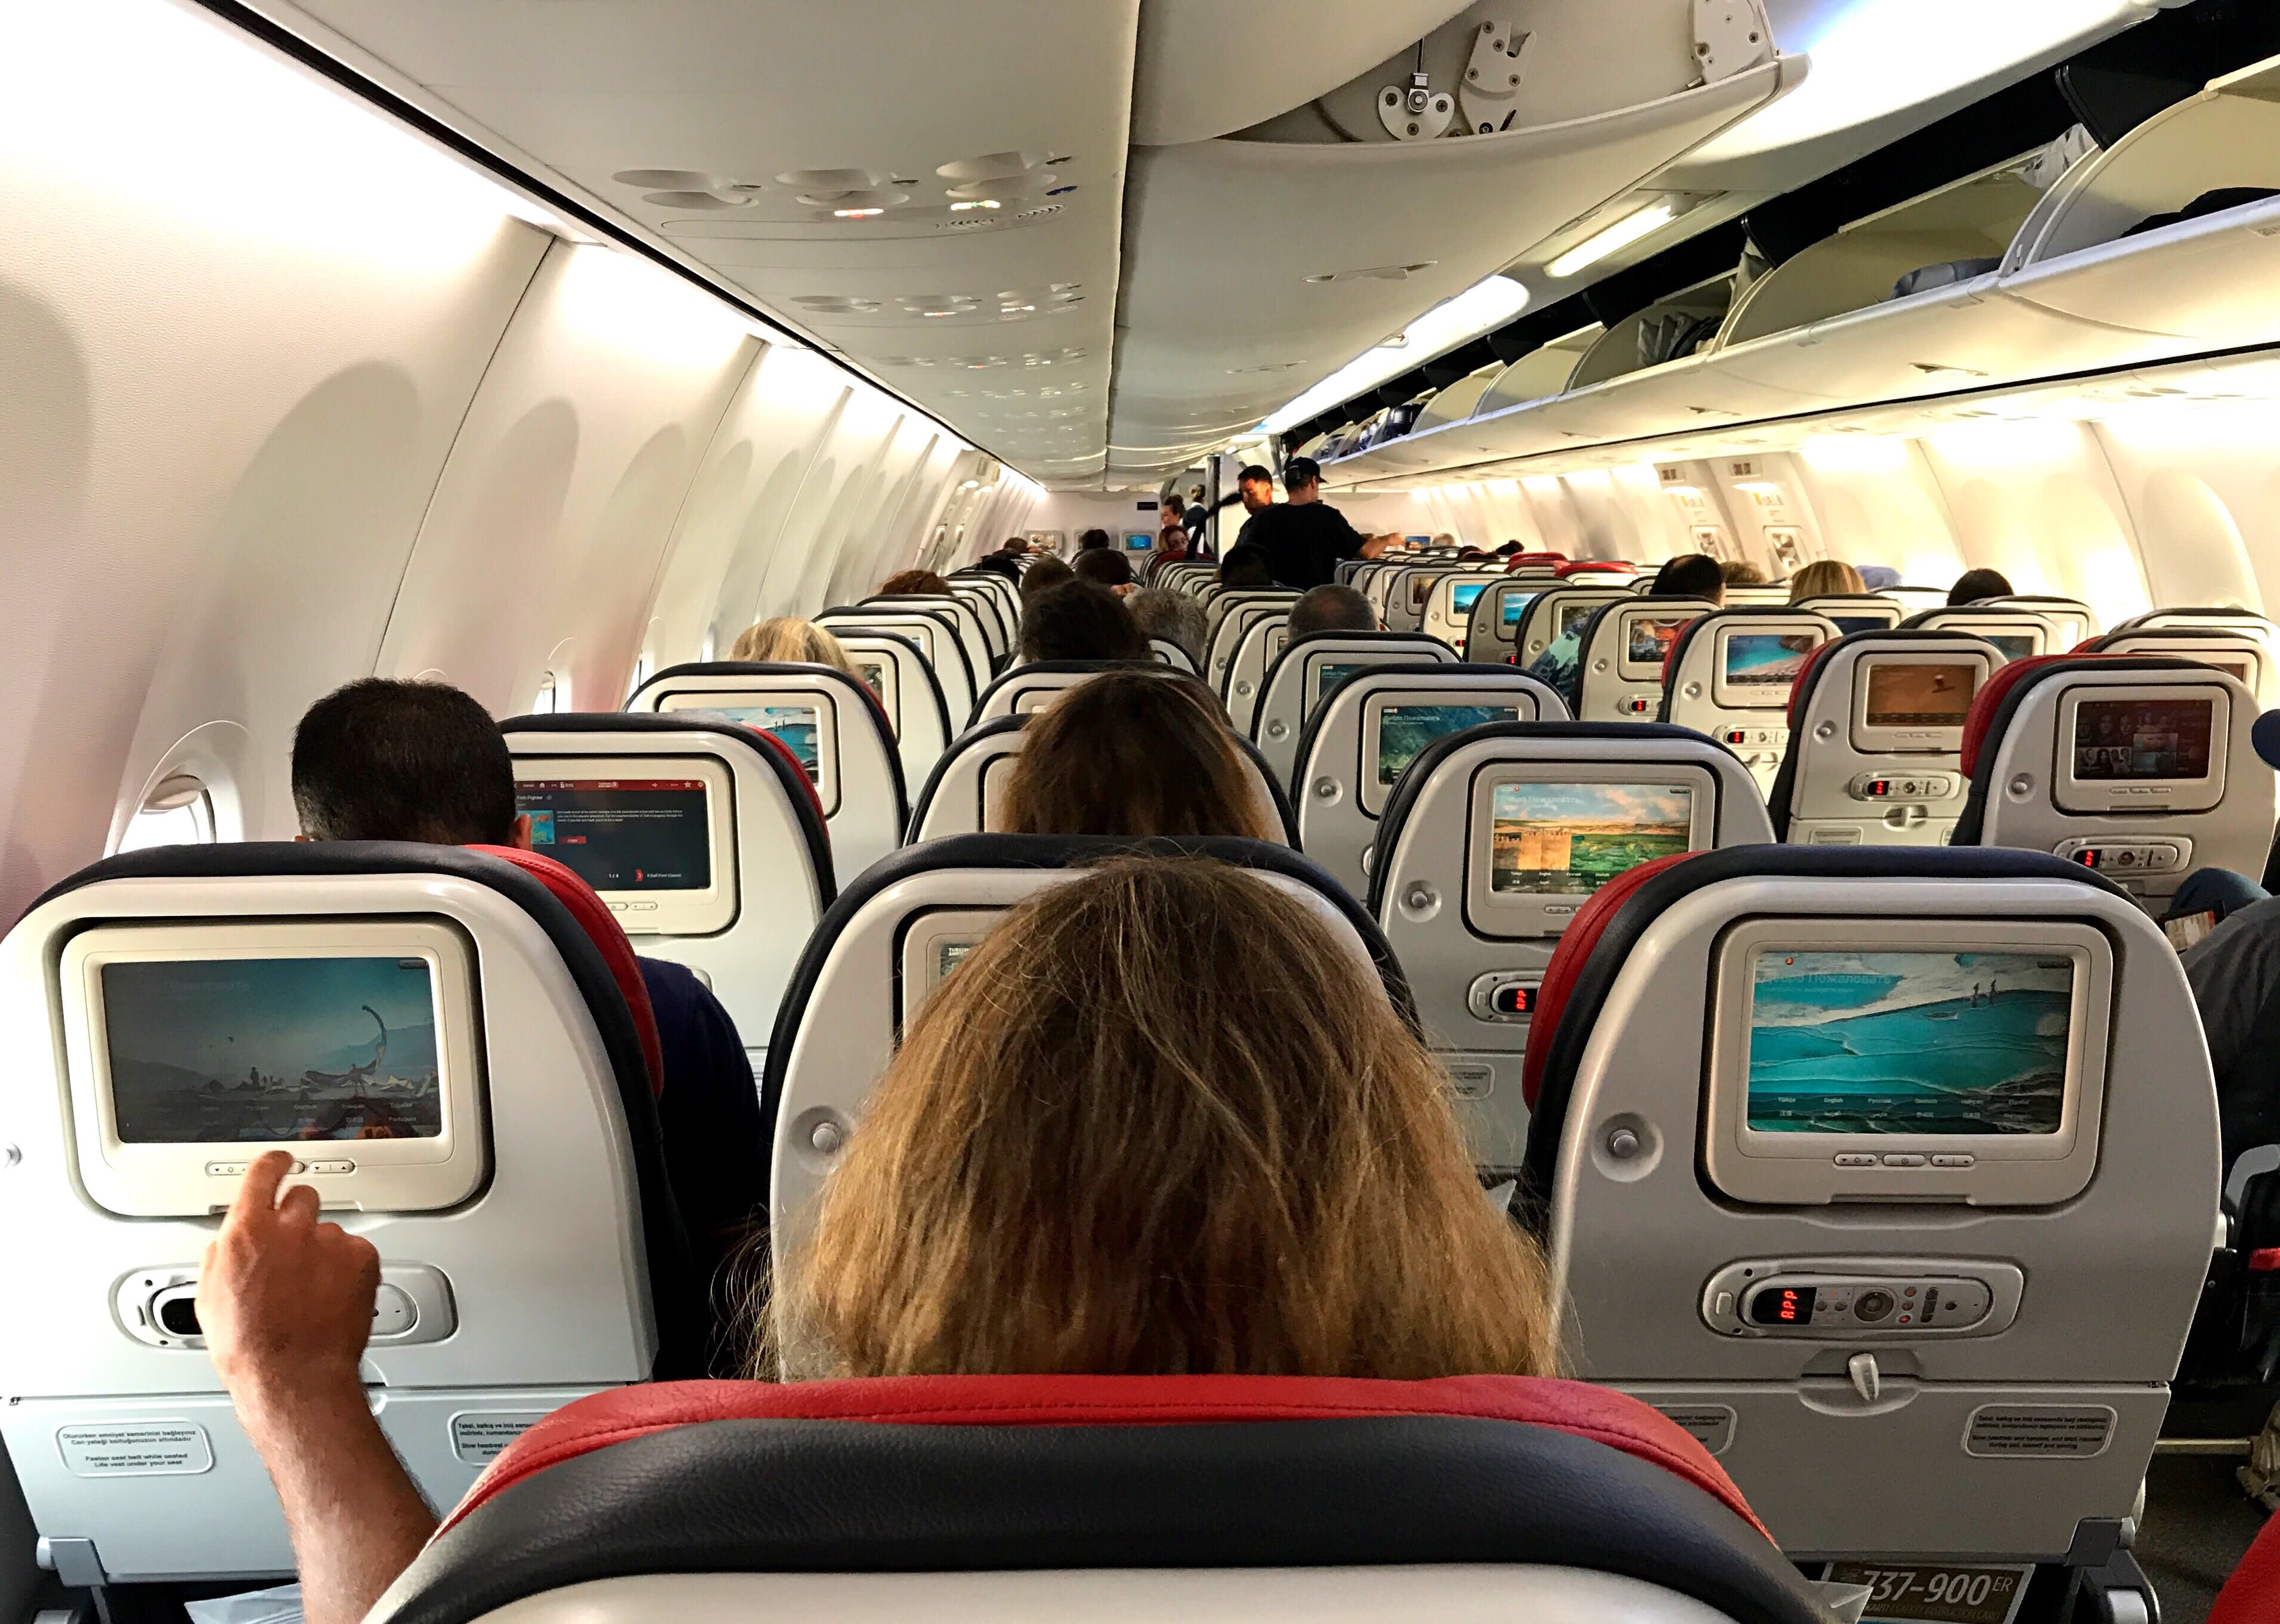 The difference between basic economy and economy plus on a plane